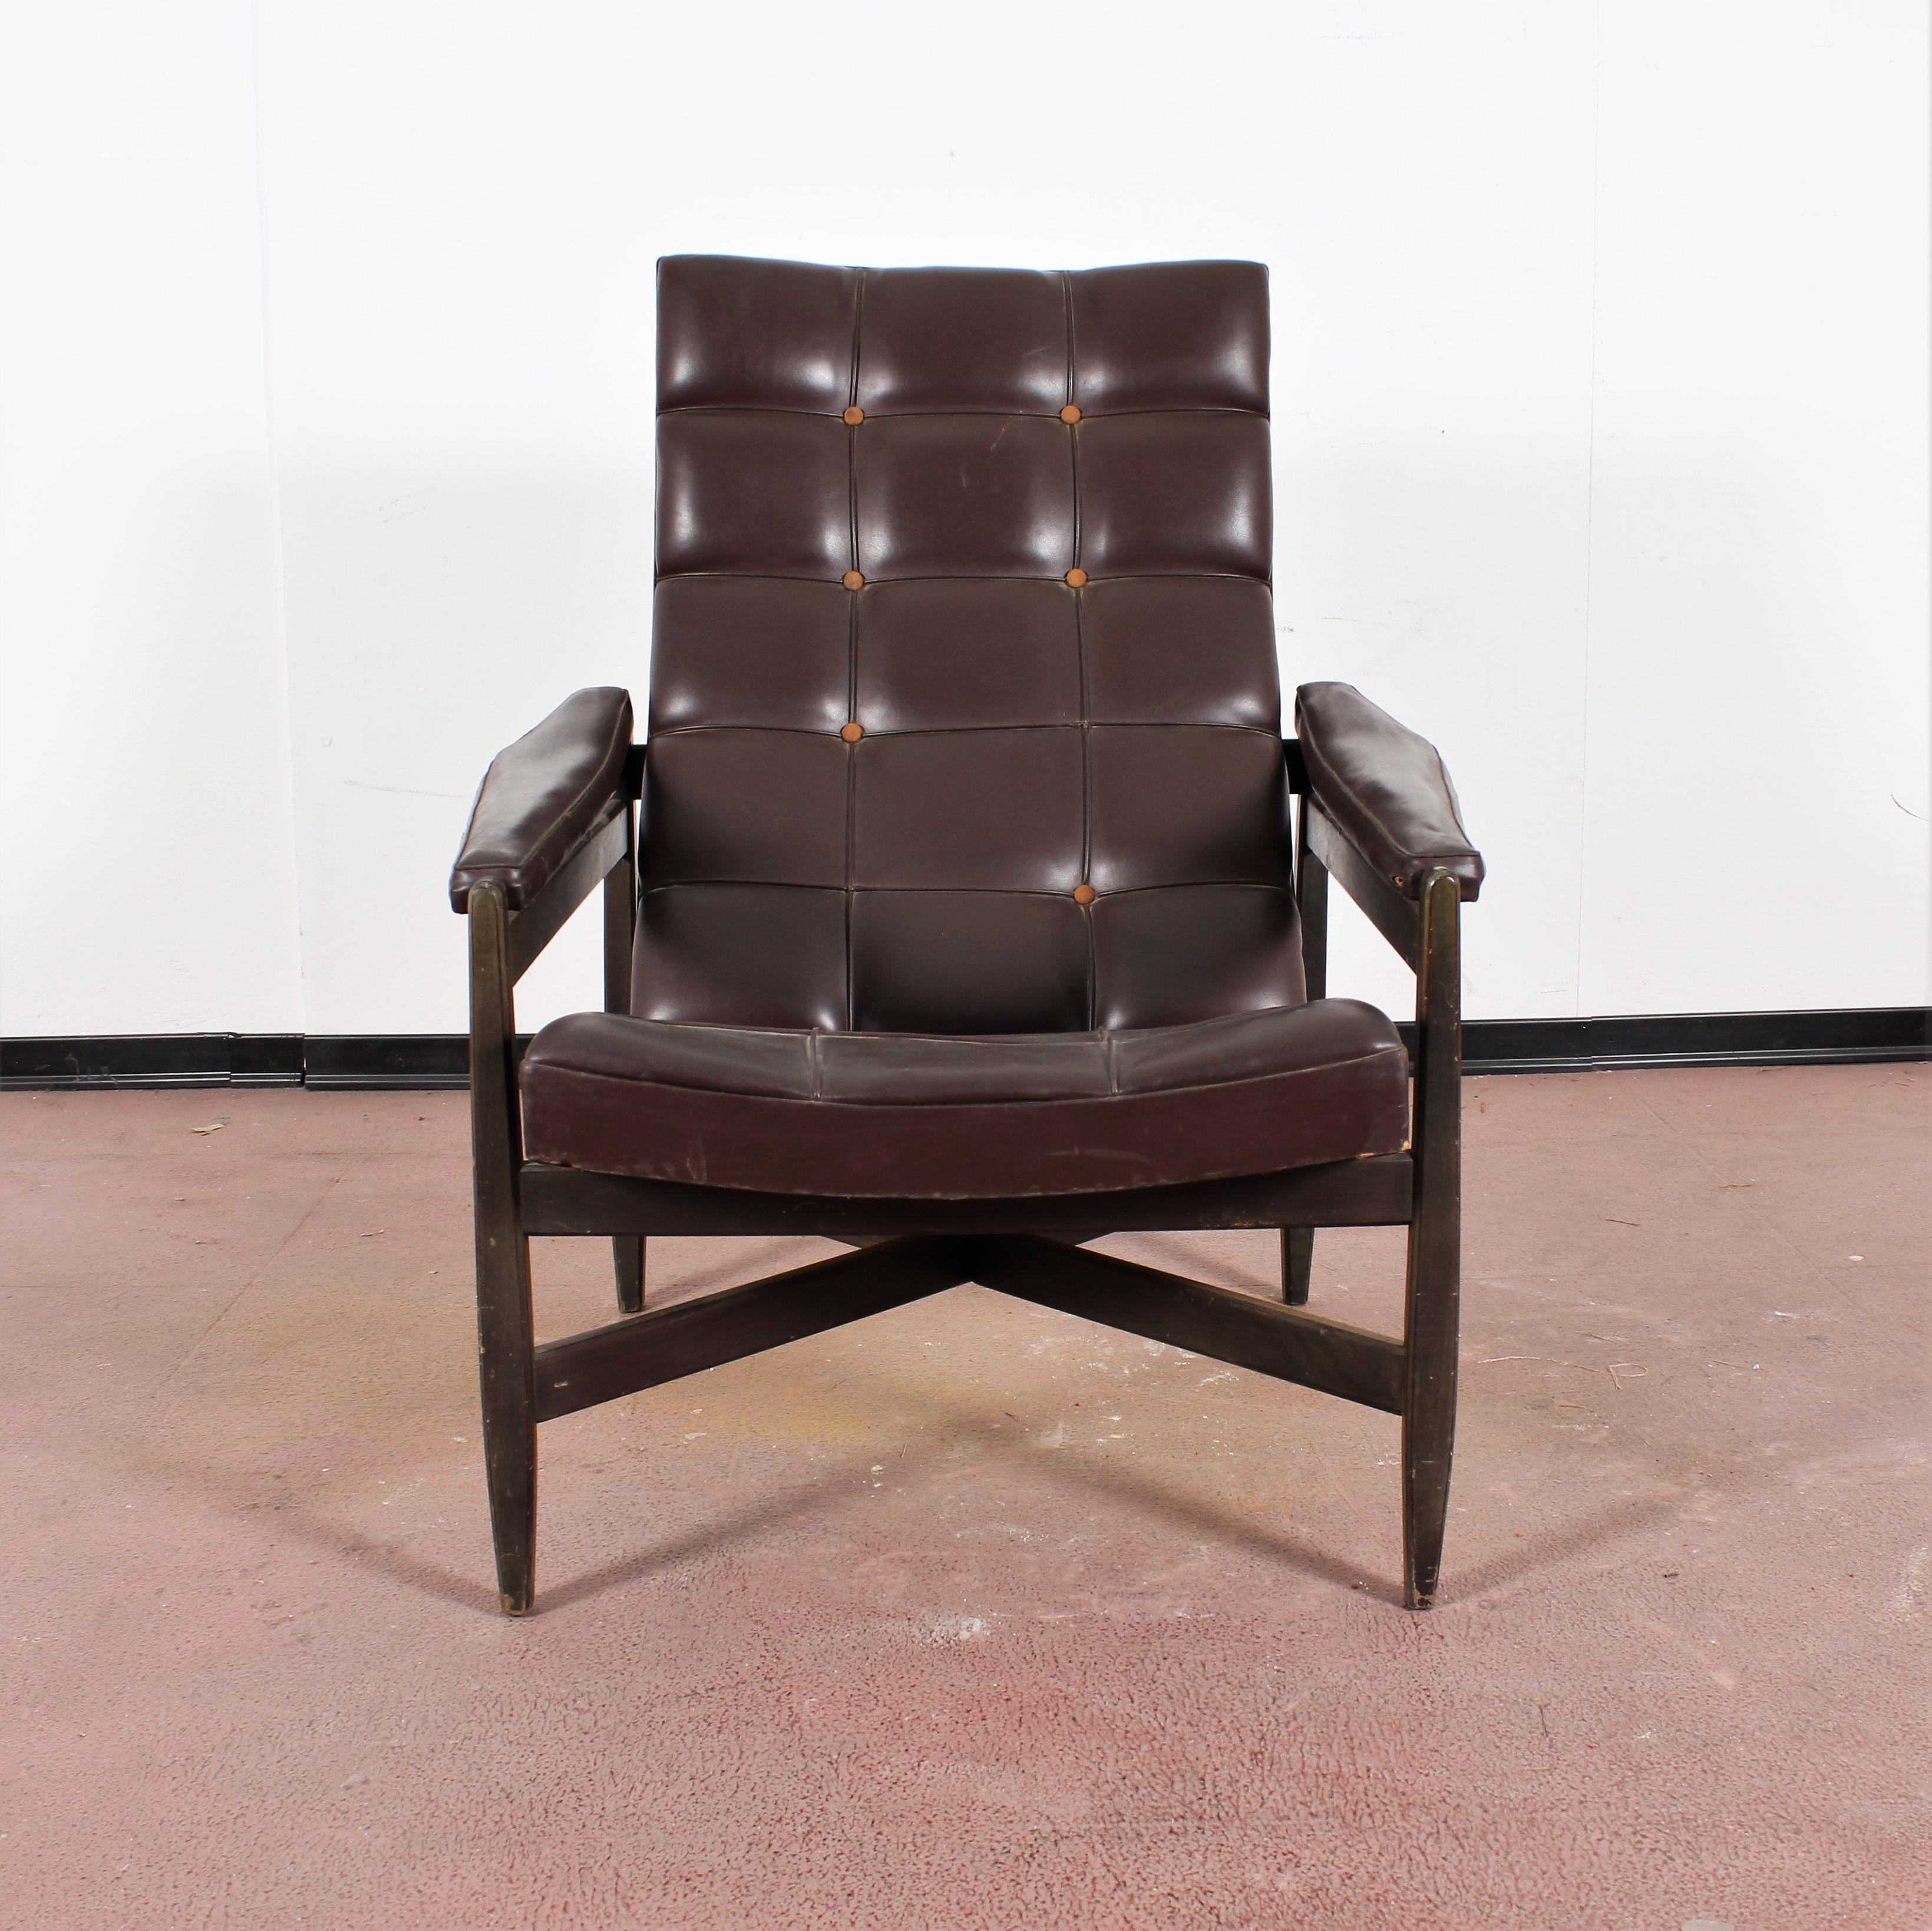 Vintage wood and brown leather lounge chair and ottoman arrtibuted to Minotti, 1960s Italy
The conditions of the upholstery and padding are not good, as can be seen in the photos.
Wear consistent with age and use.

  